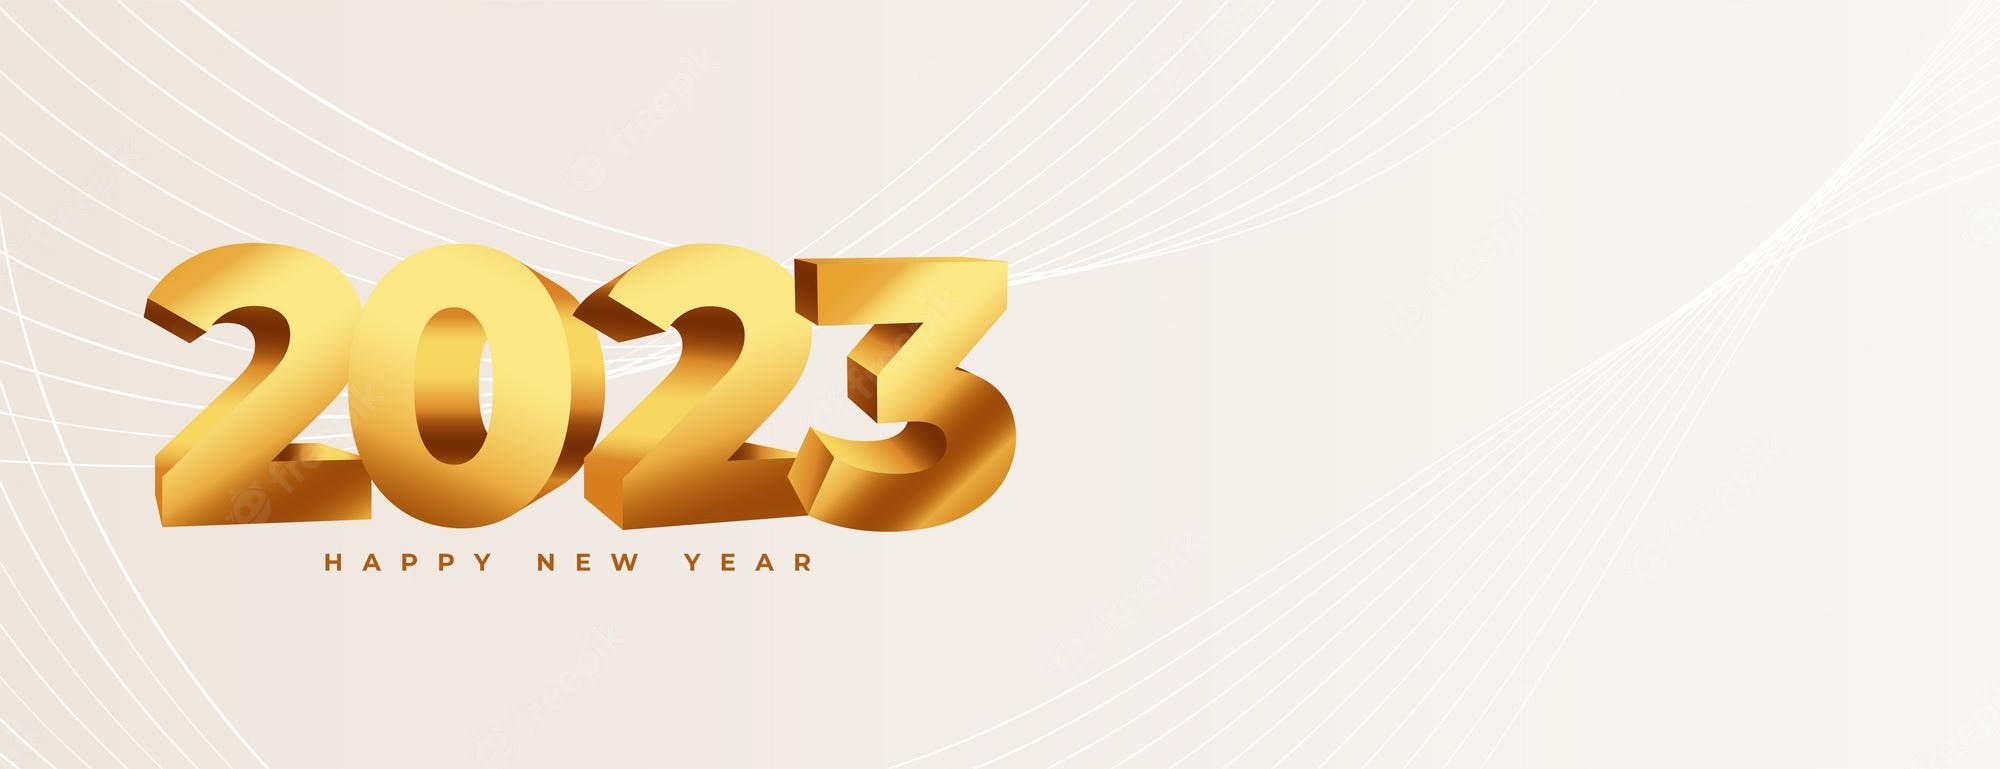 Free Vectord style golden 2023 lettering for new year event wallpaper